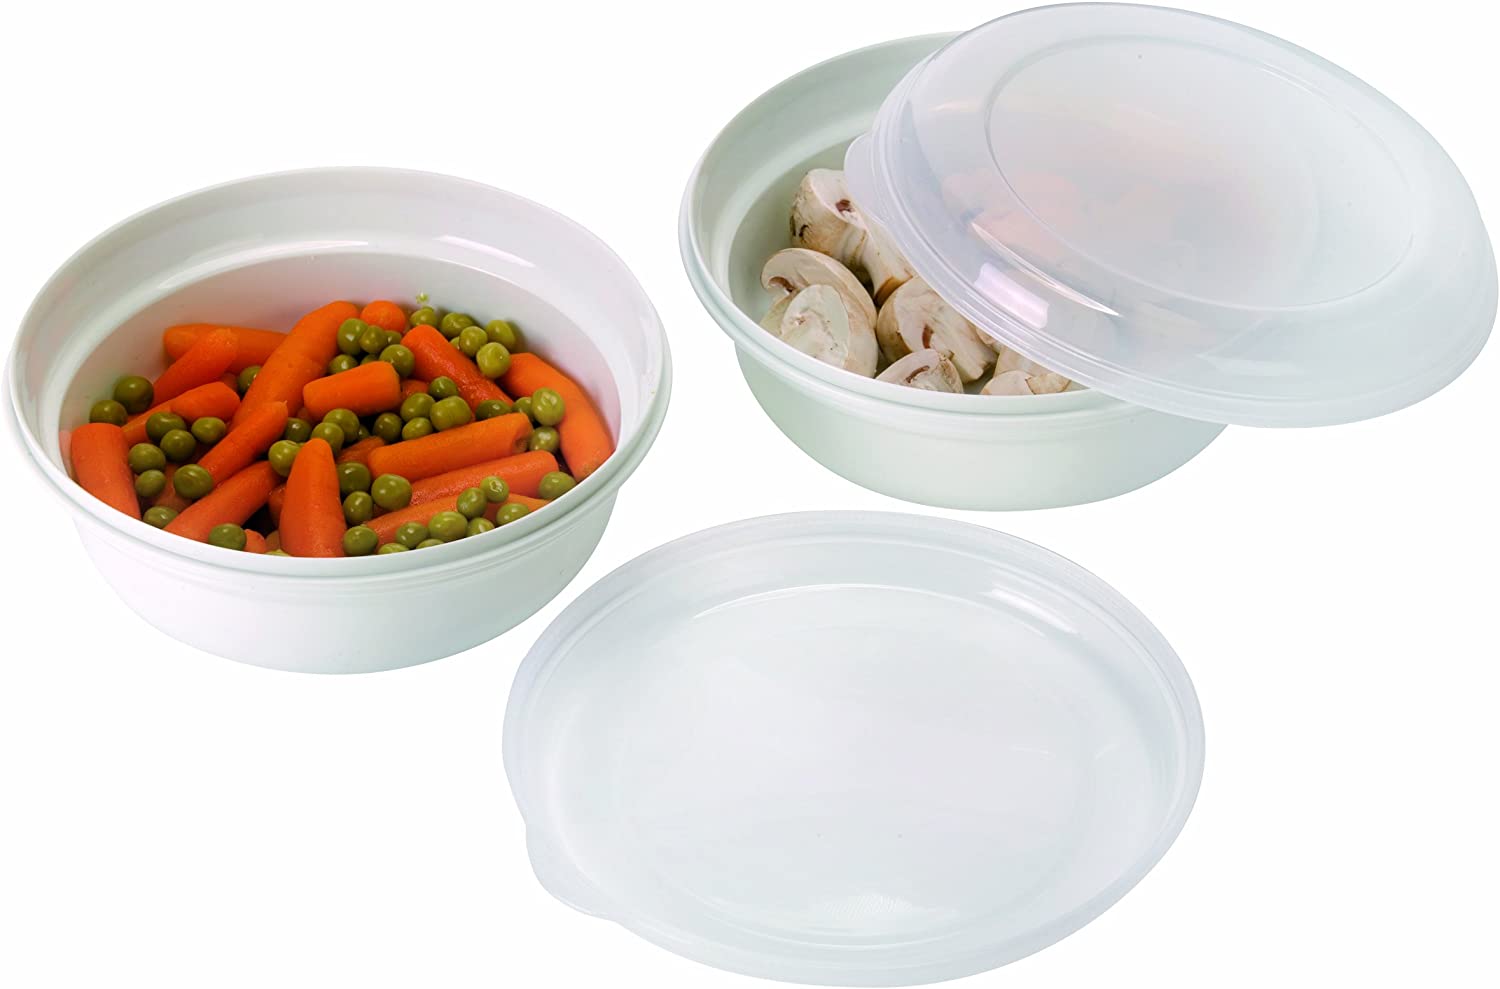 Tescoma Microline 0.5 Litre Round Dish with Lid Set of 2